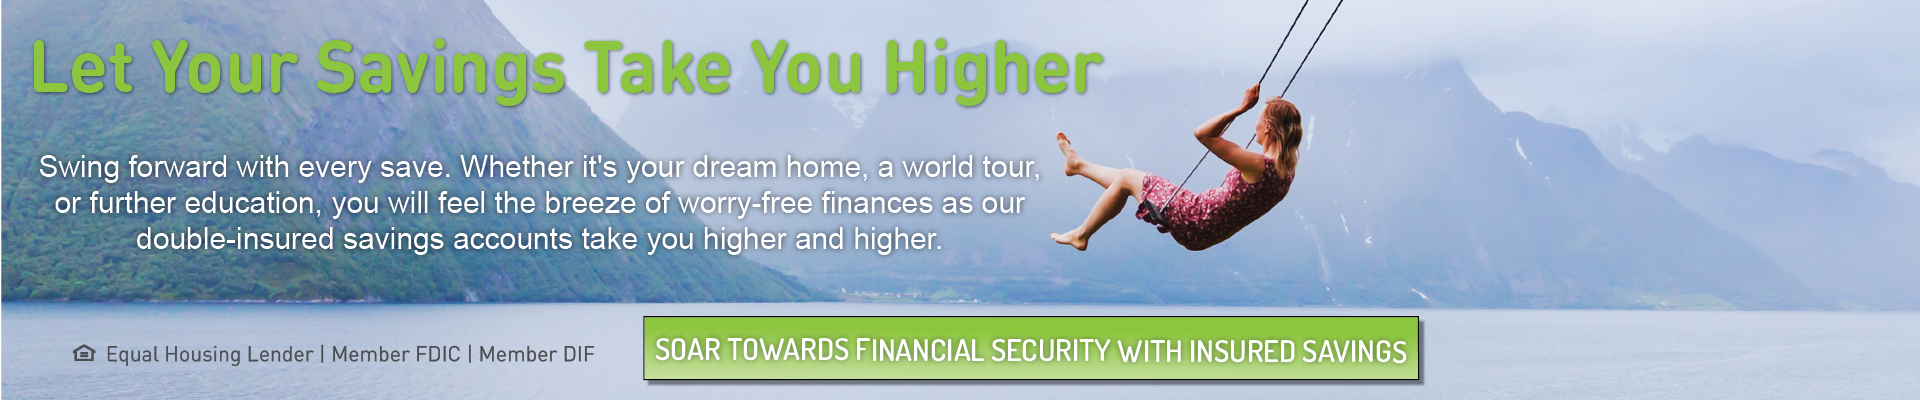 Let Your Savings Take You Higher. Swing forward with every save. Whether it's your dream home, a world tour, or further education, you will feel the breeze of worry-free finances as our double-insured savings accounts take you higher and higher. Click here to soar towards financial security with insured savings.